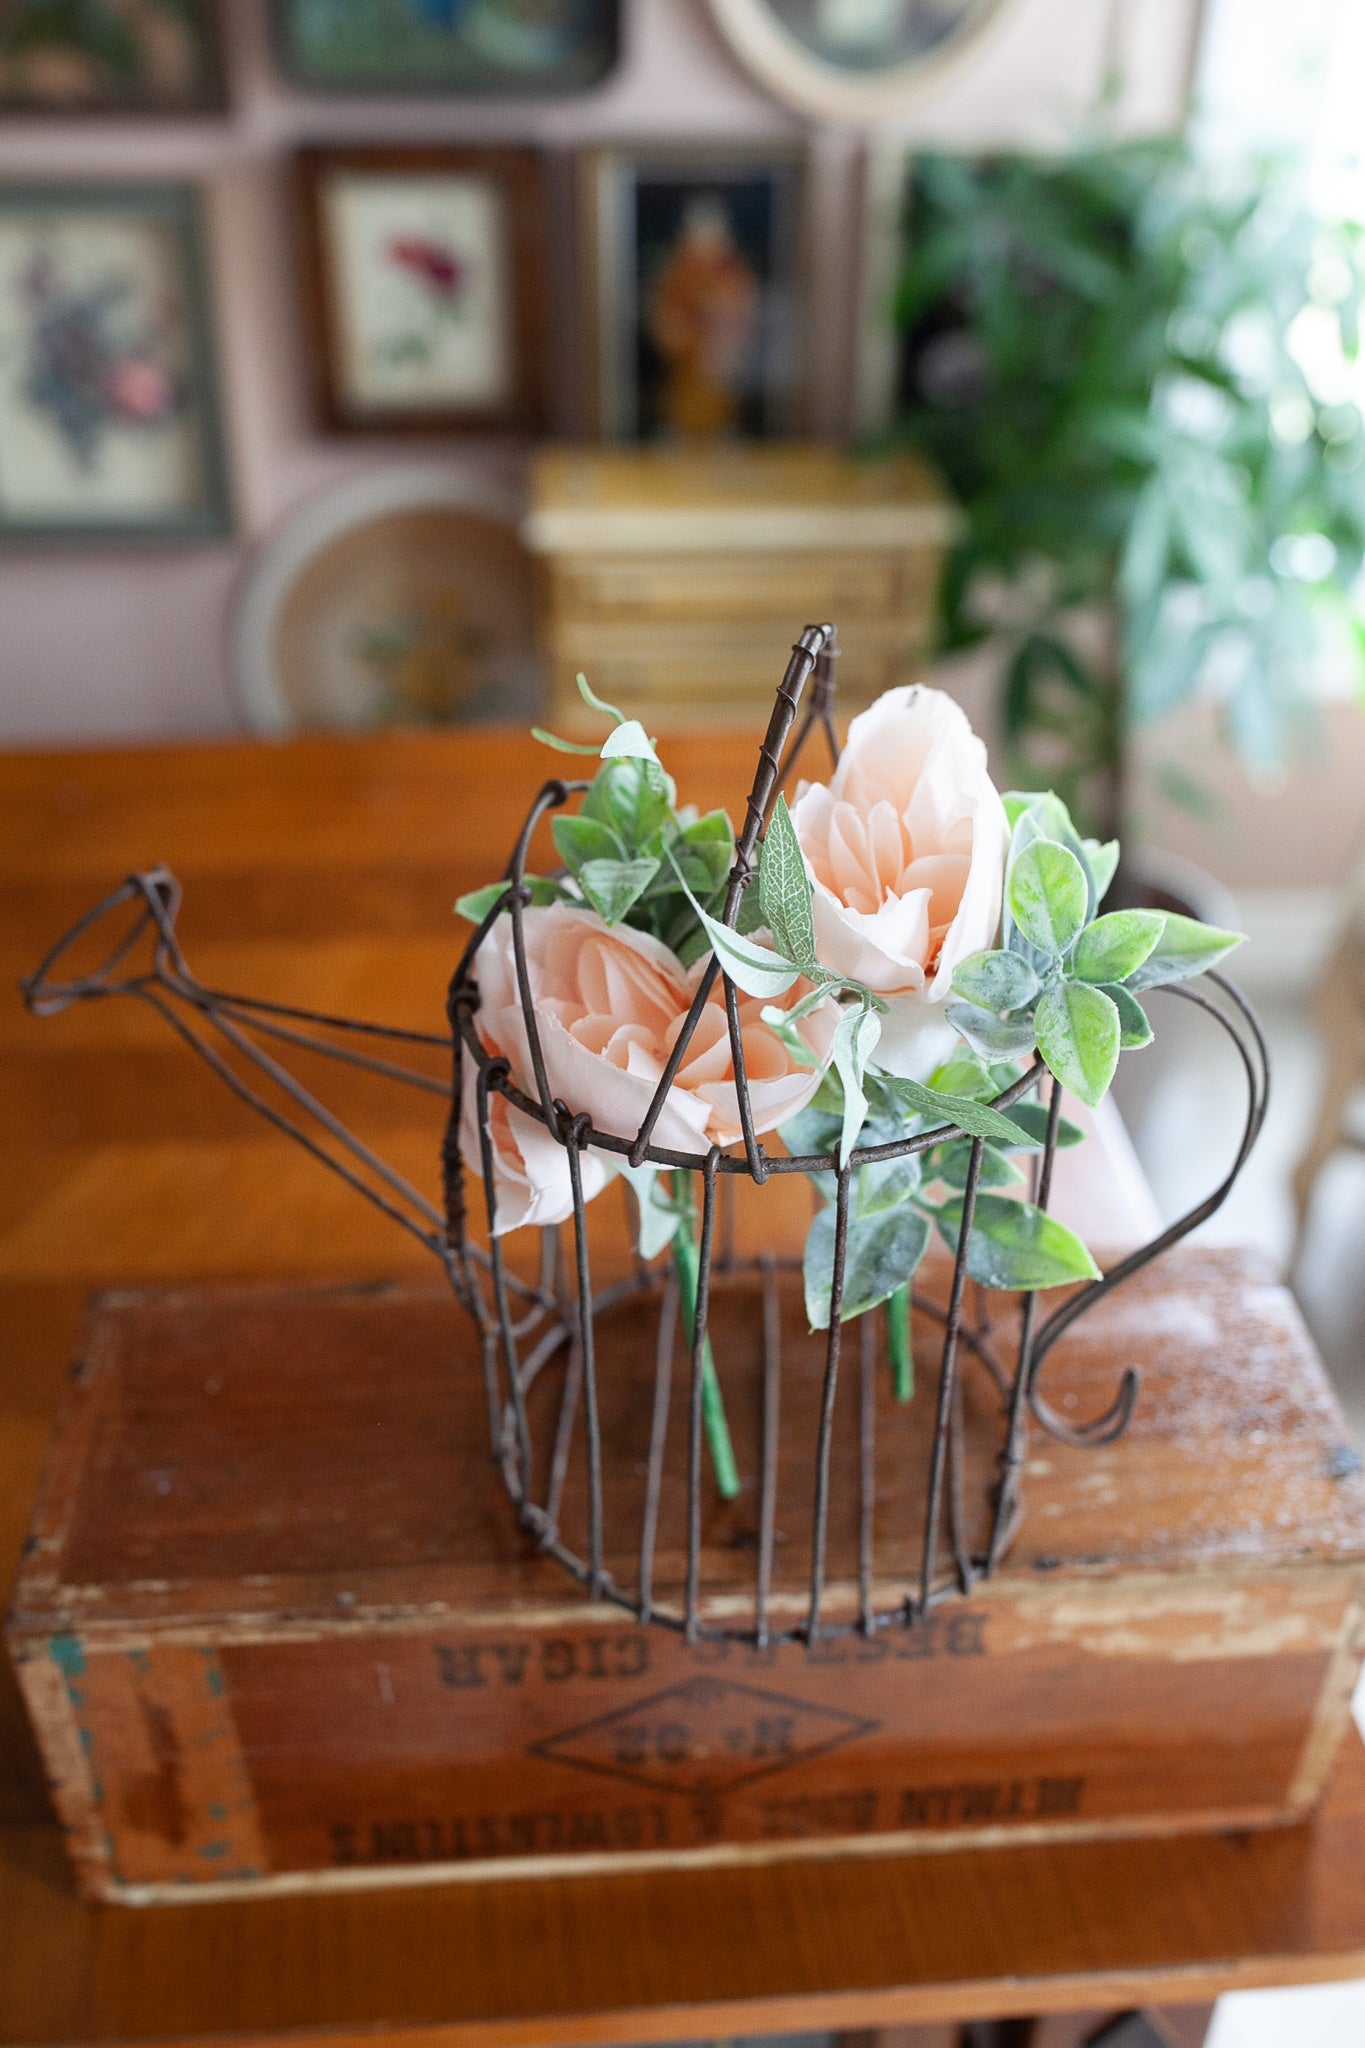 Vintage Watering Can - Wire Watering Can -Vintage Garden Decor